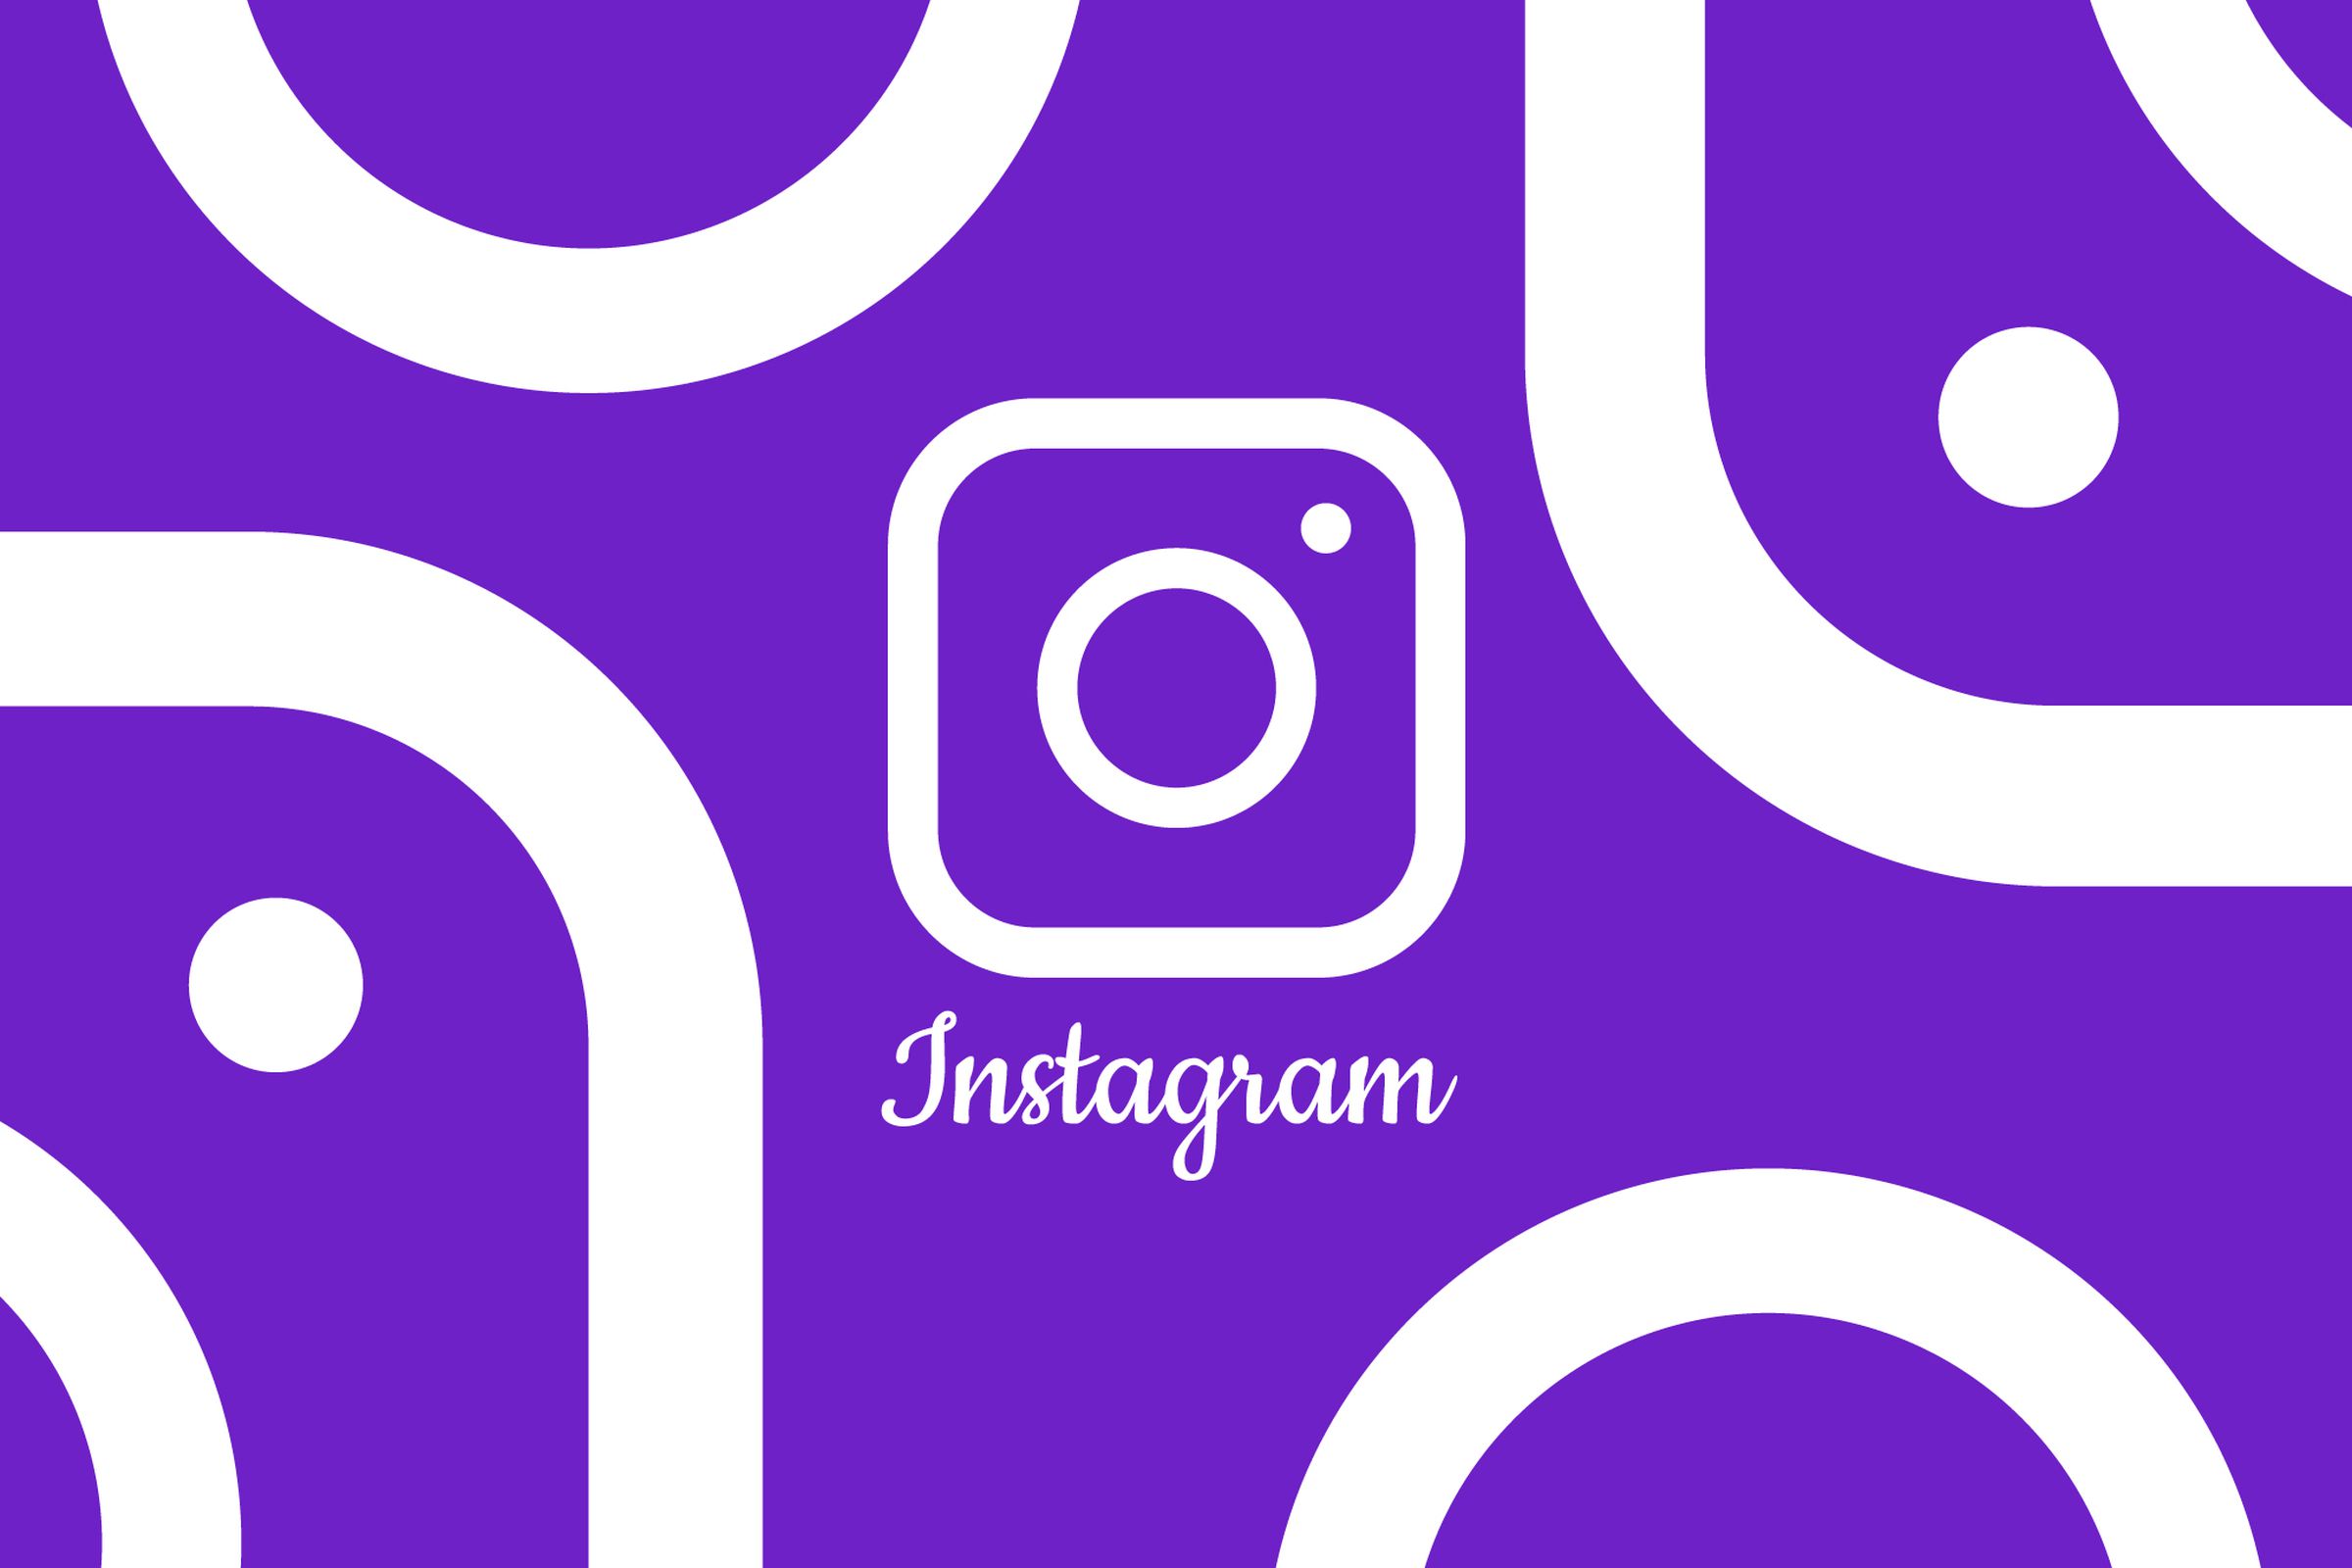 An image showing Instagram’s logo on a purple background